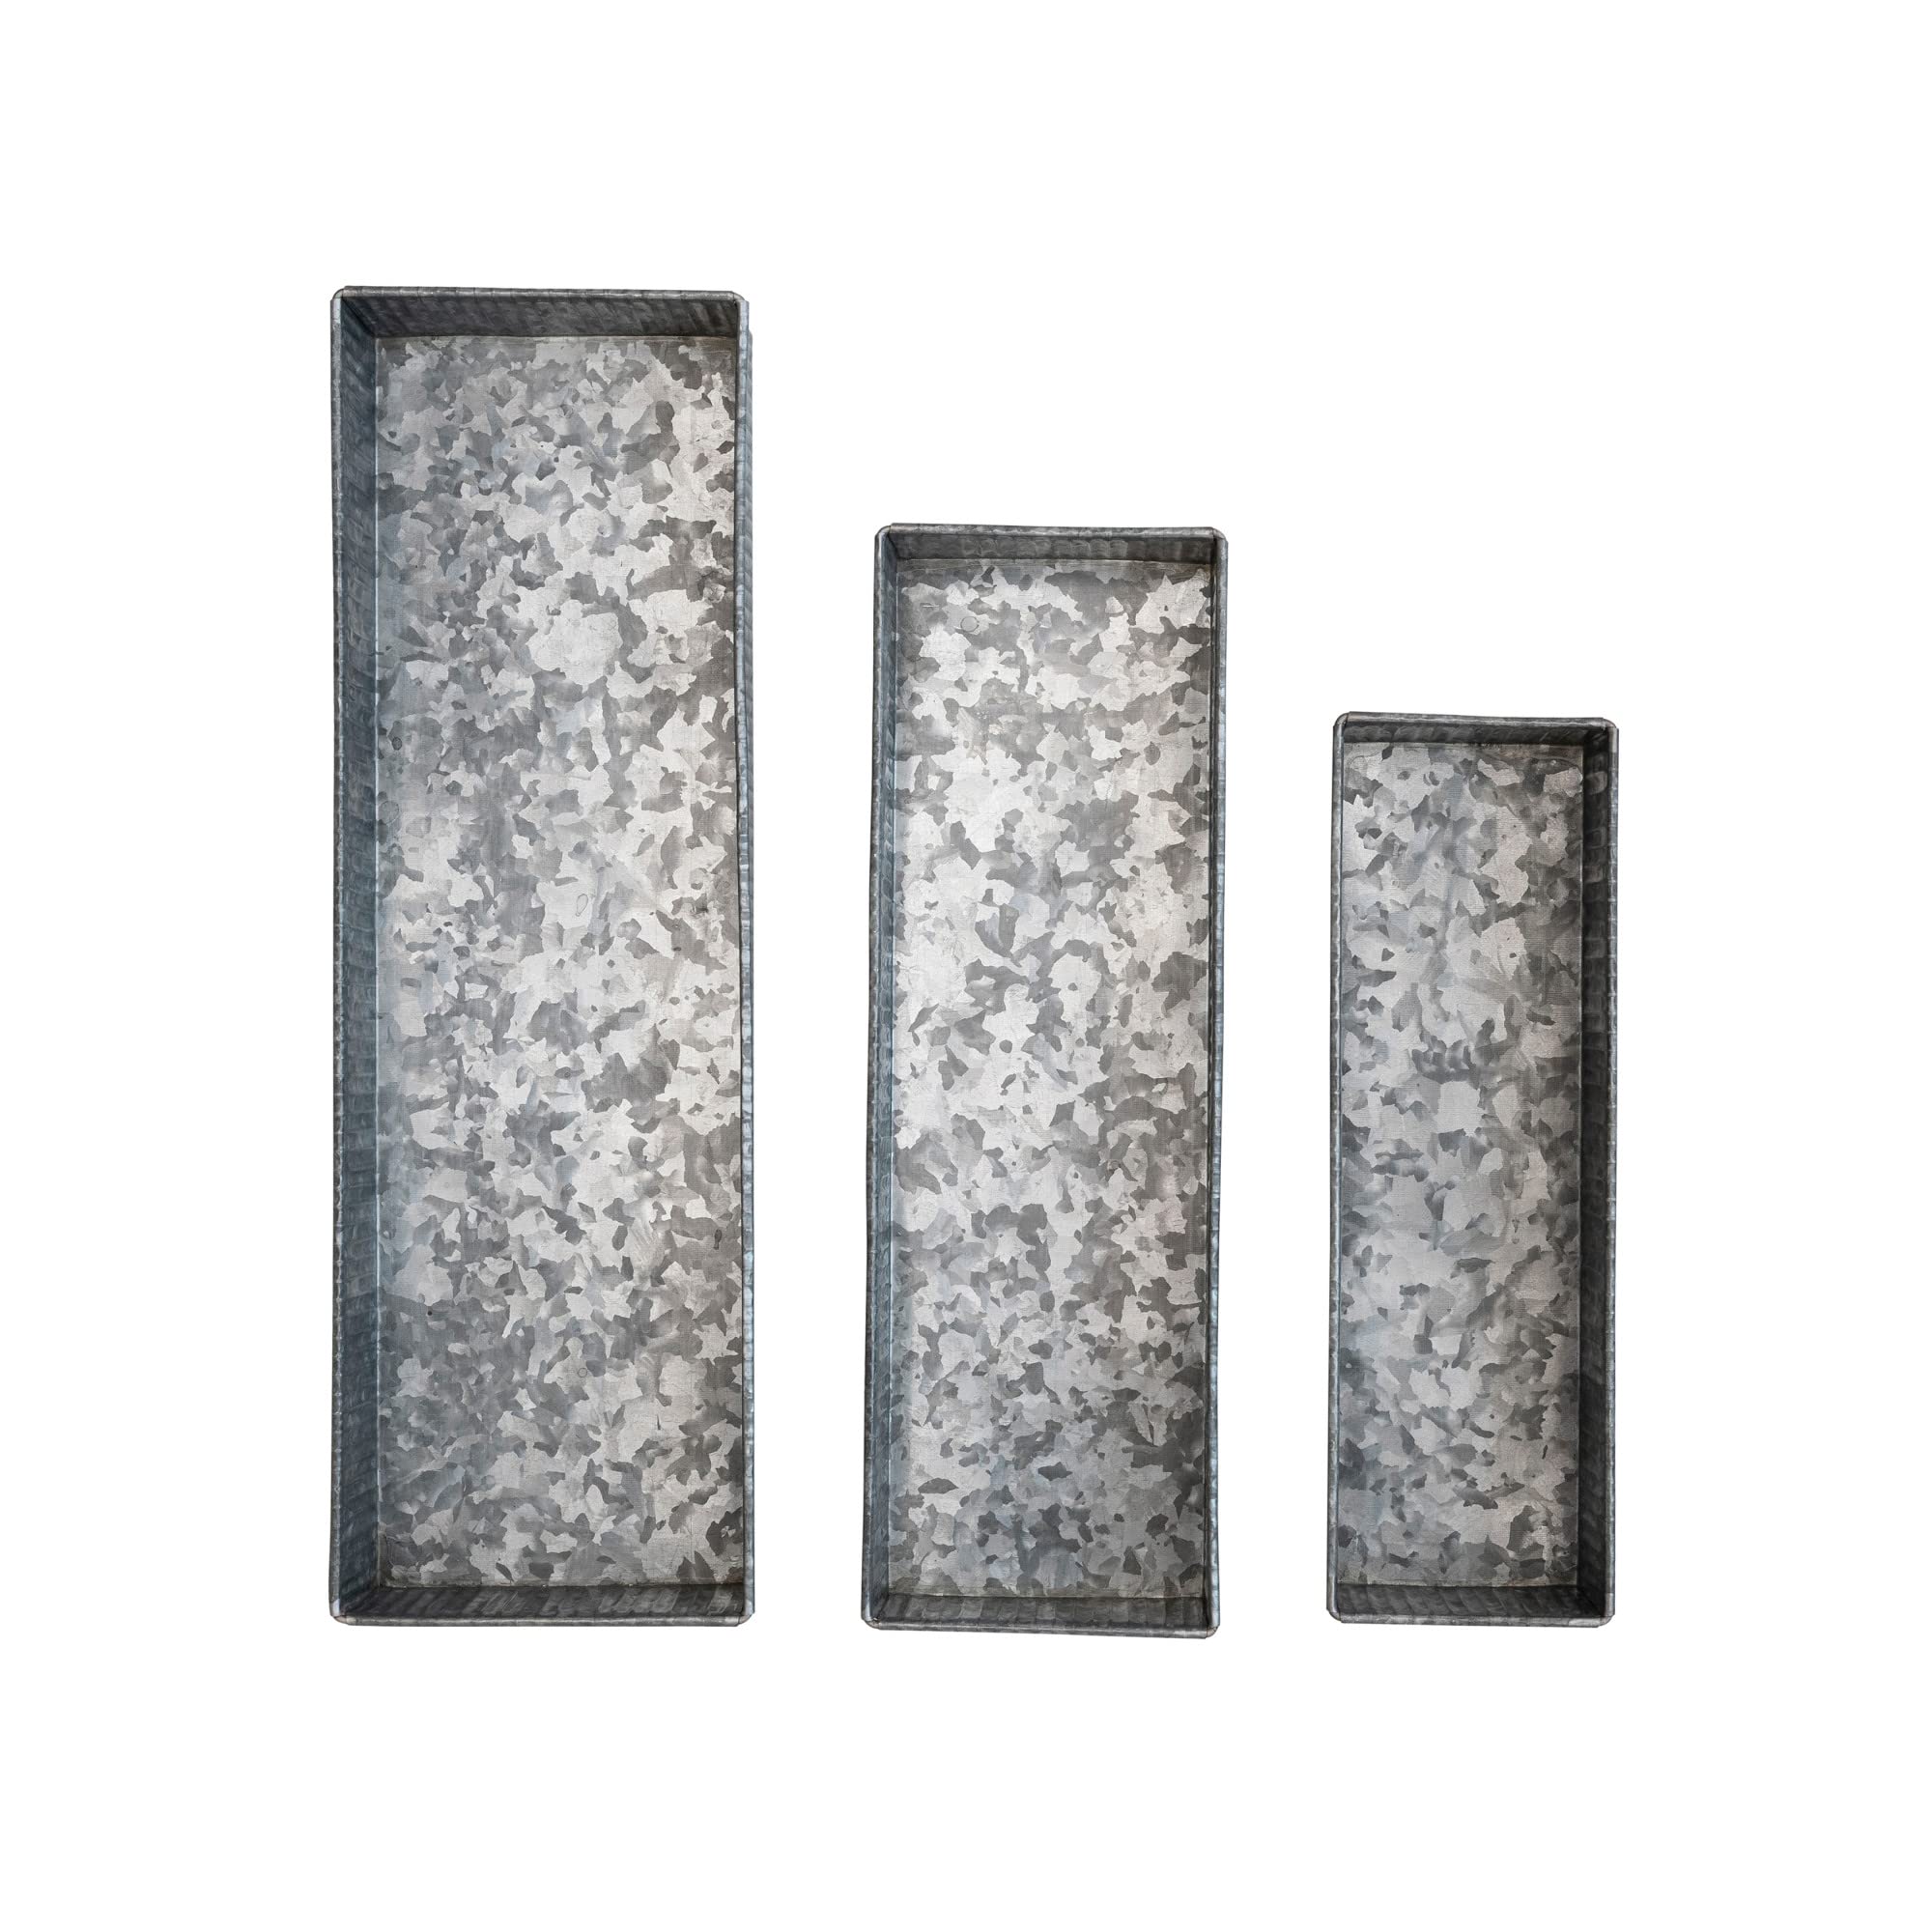 Creative Co-Op Metal Nesting, Set of 3 Sizes, Antique Galvanized Finish Decorative Tray, Silver